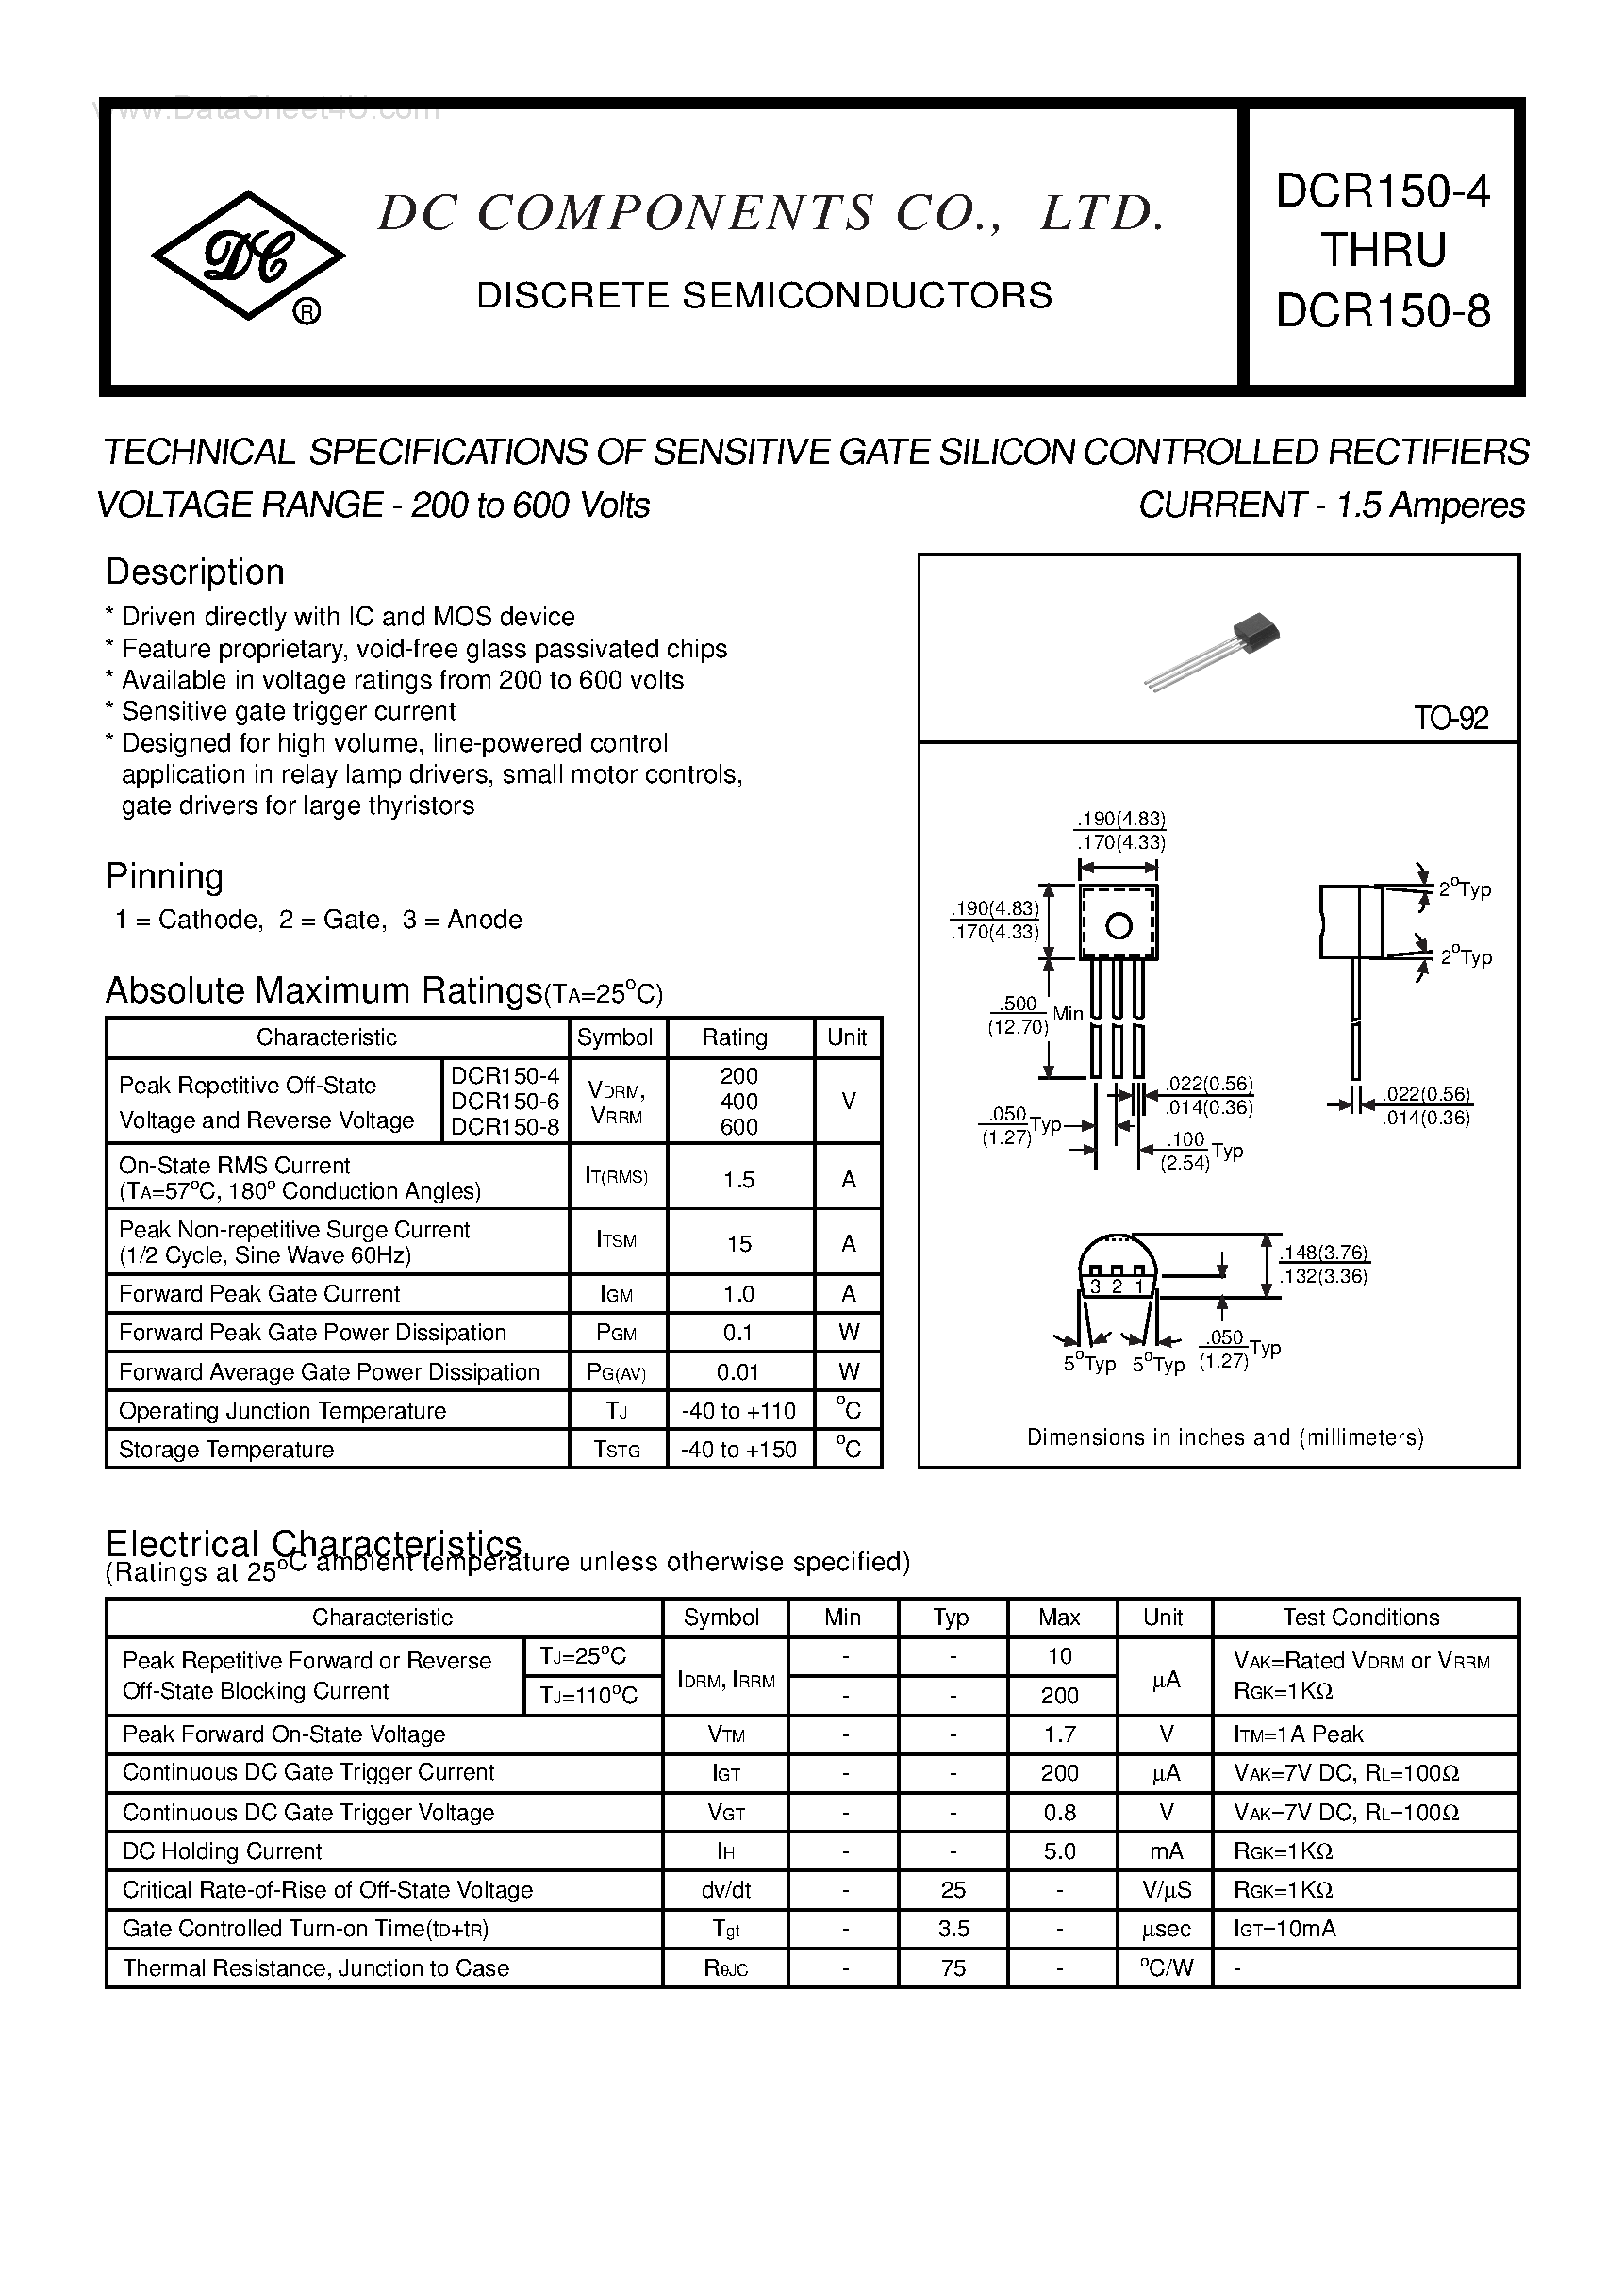 Даташит DCR150-4-(DCR150-4 - DCR150-8) TECHNICAL SPECIFICATIONS OF SENSITIVE GATE SILICON CONTROLLED RECTIFIERS страница 1